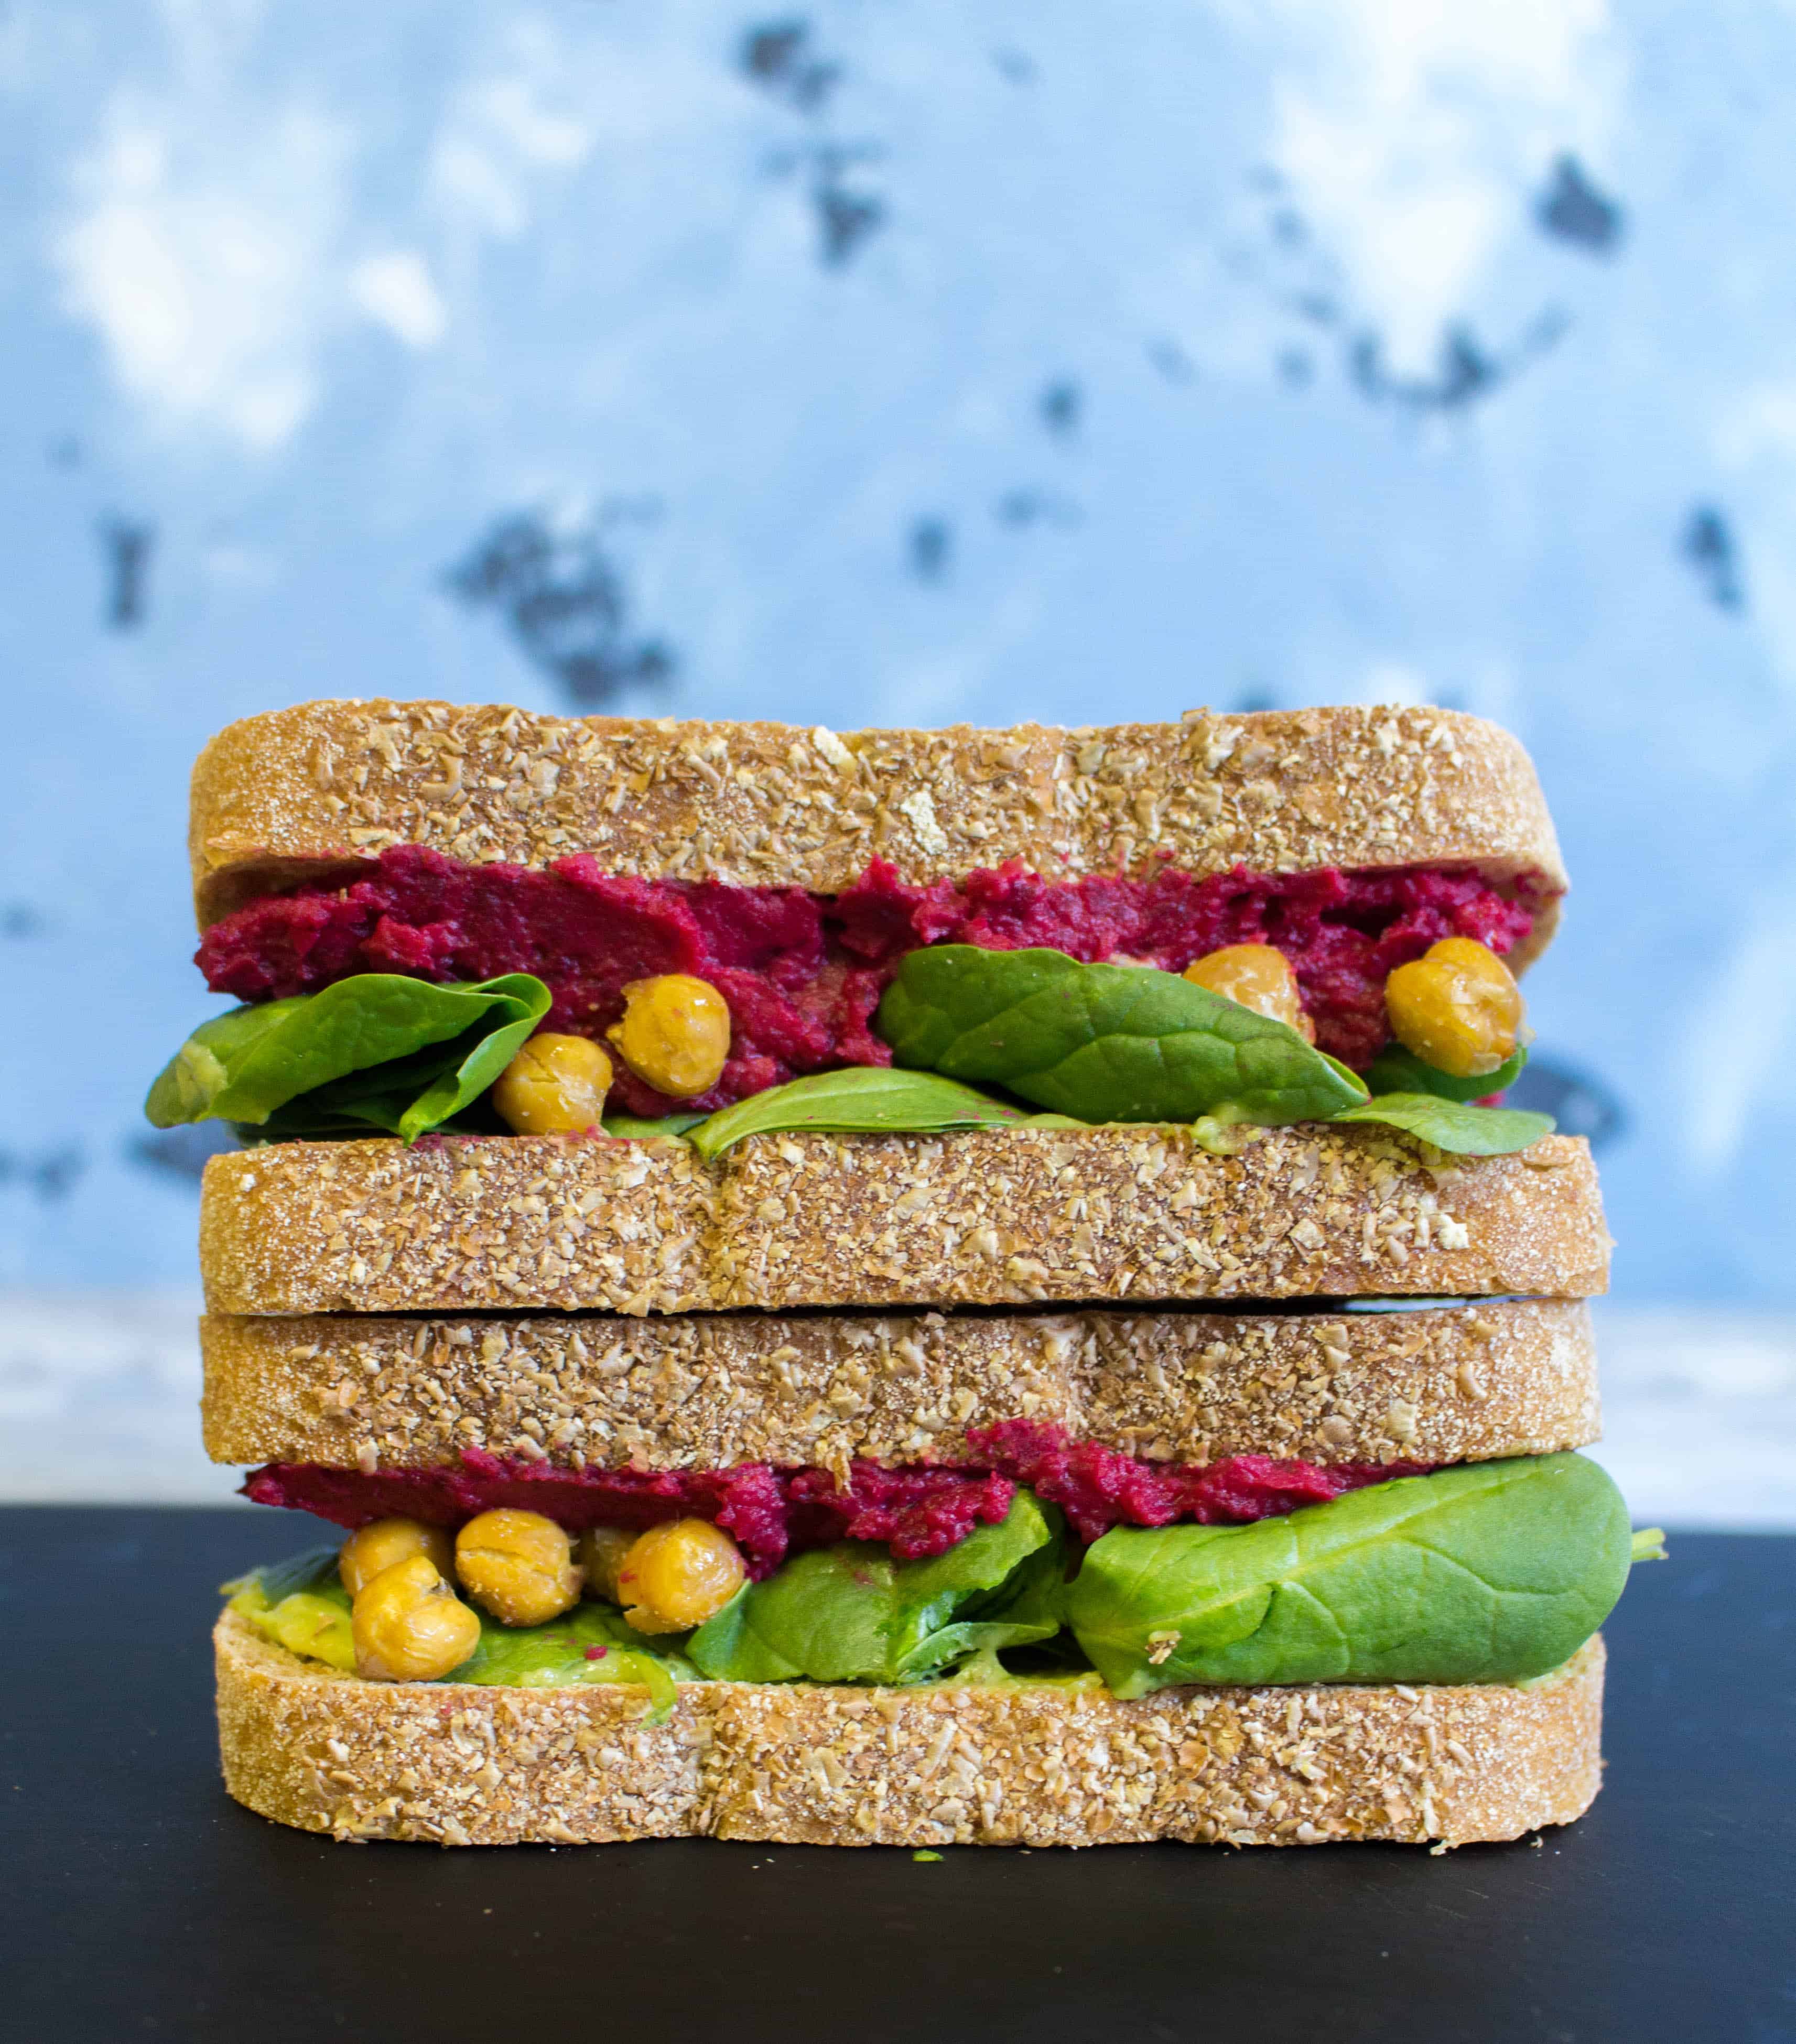 Work Week Lunch: Beet Hummus, Guacamole, Roasted Chickpea, and Spinach Sandwich 